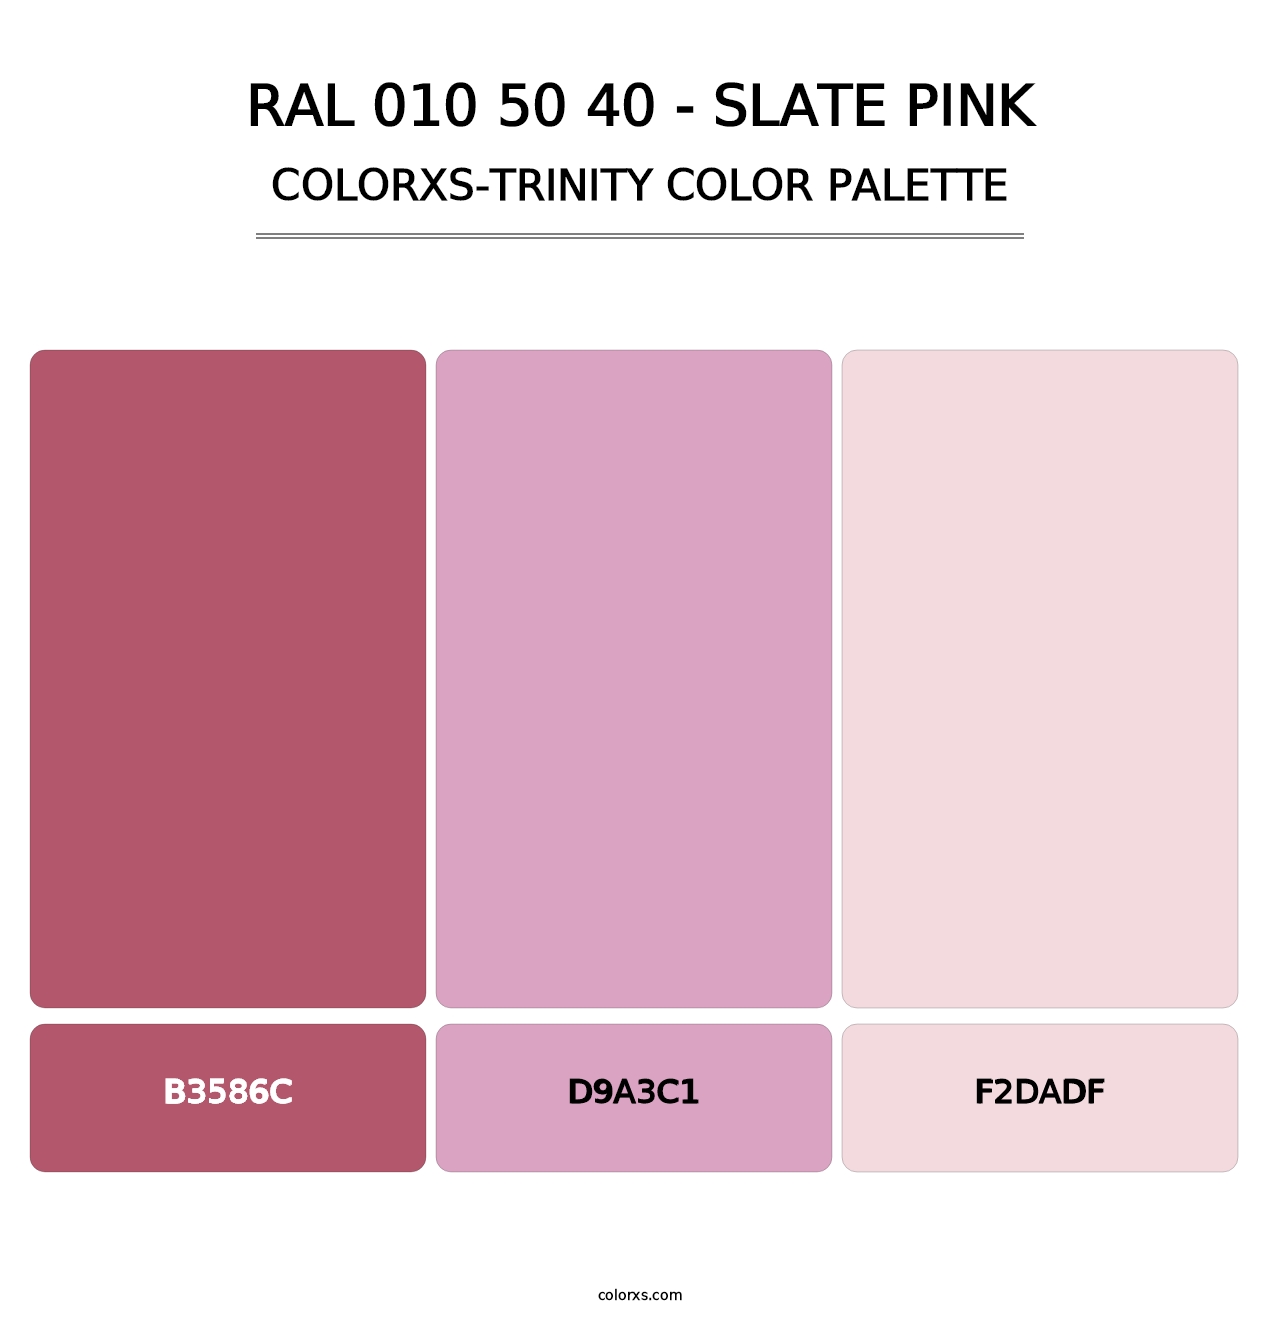 RAL 010 50 40 - Slate Pink - Colorxs Trinity Palette